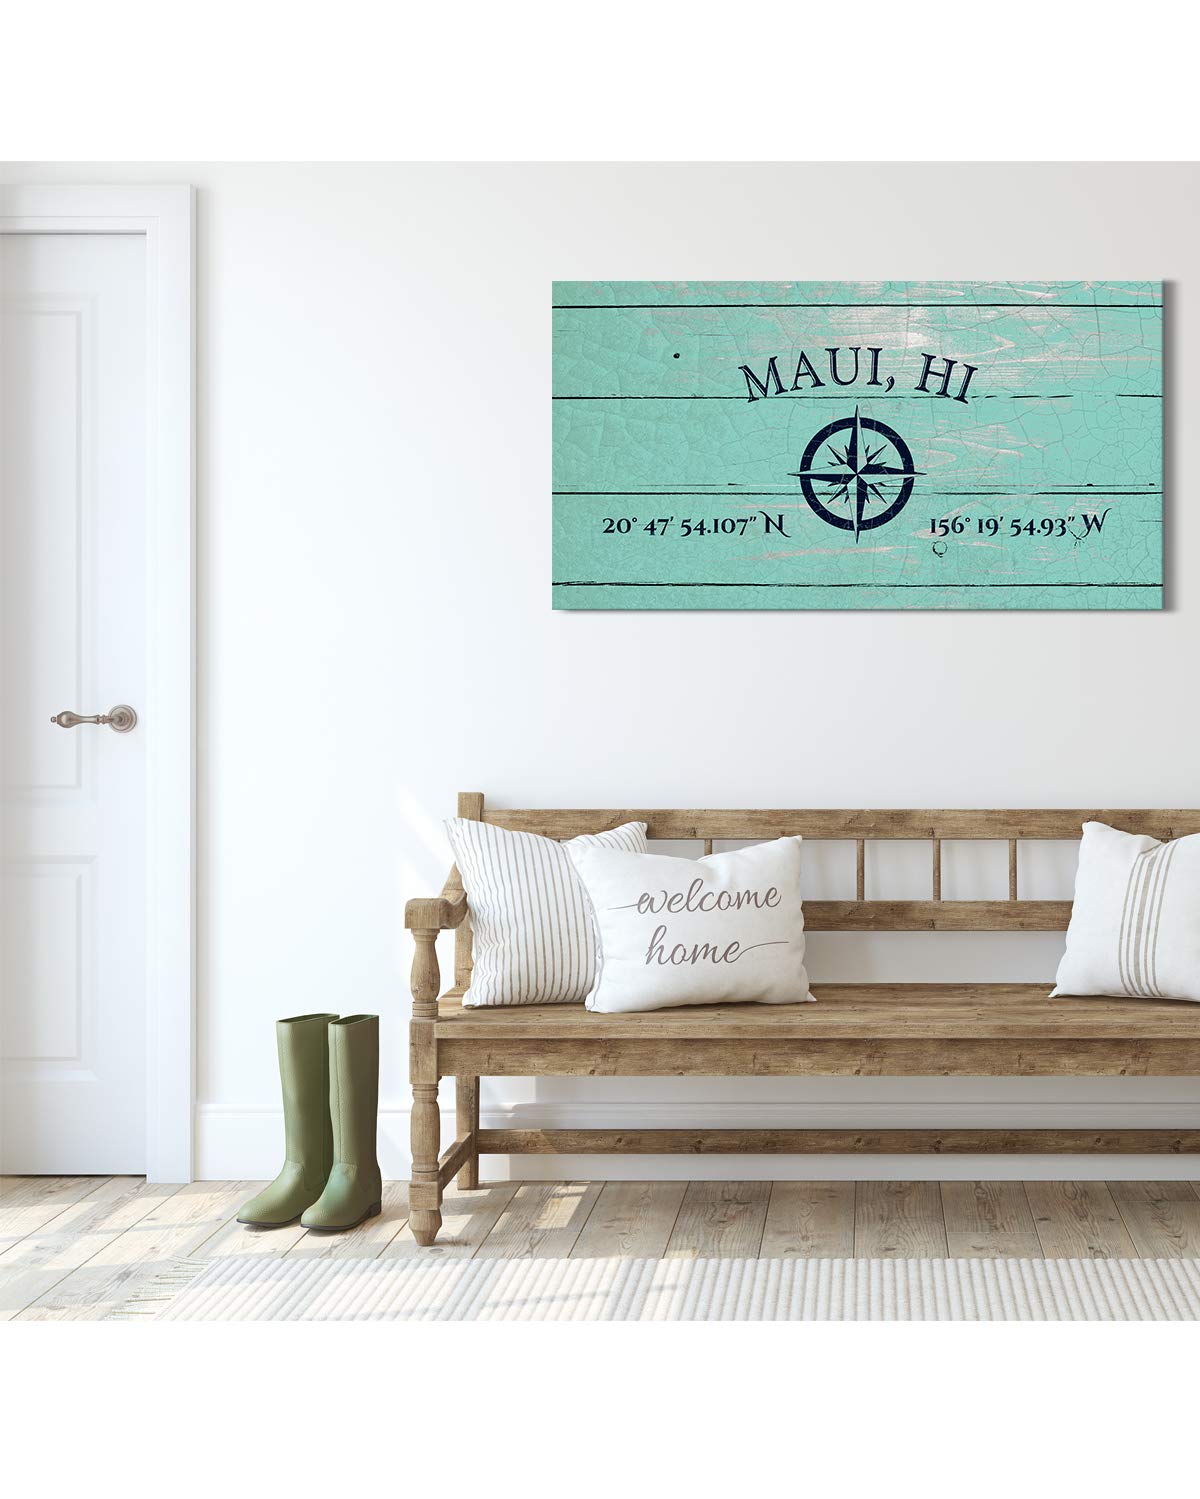 Maui, HI 20° 47' 54.107" N, 156° 19' 54.93" W - Wall Decor Art Canvas with a distressed light turquoise woodgrain background - Ready to Hang - Great for above a couch, table, bed or more